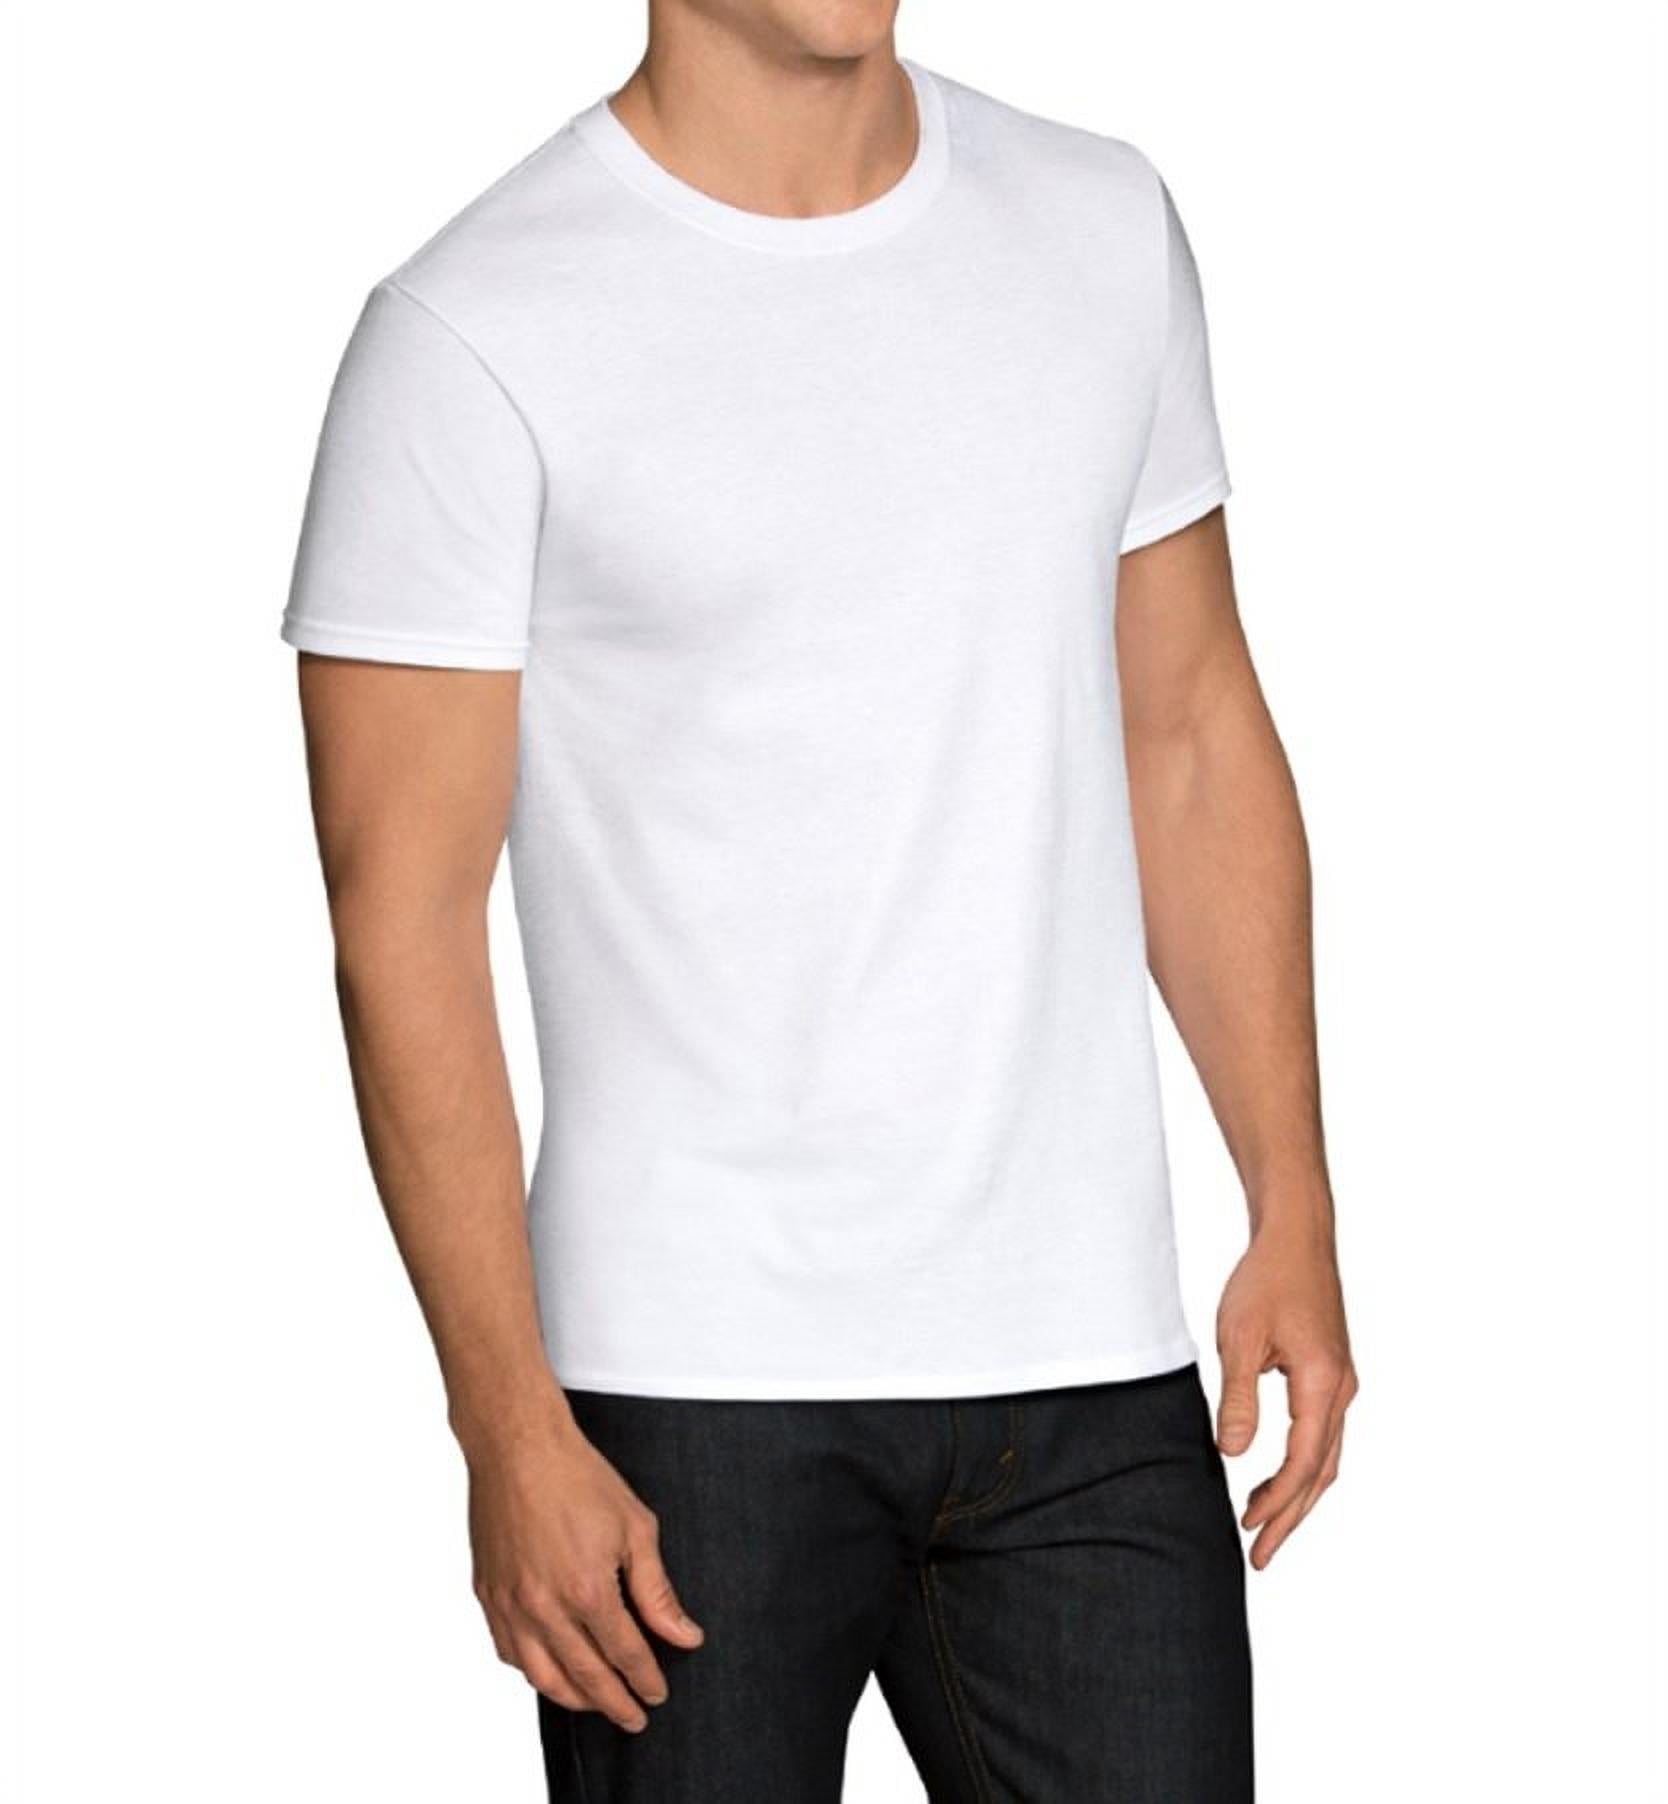 of the Loom White Crew T-Shirts, 6 Pack Walmart.com